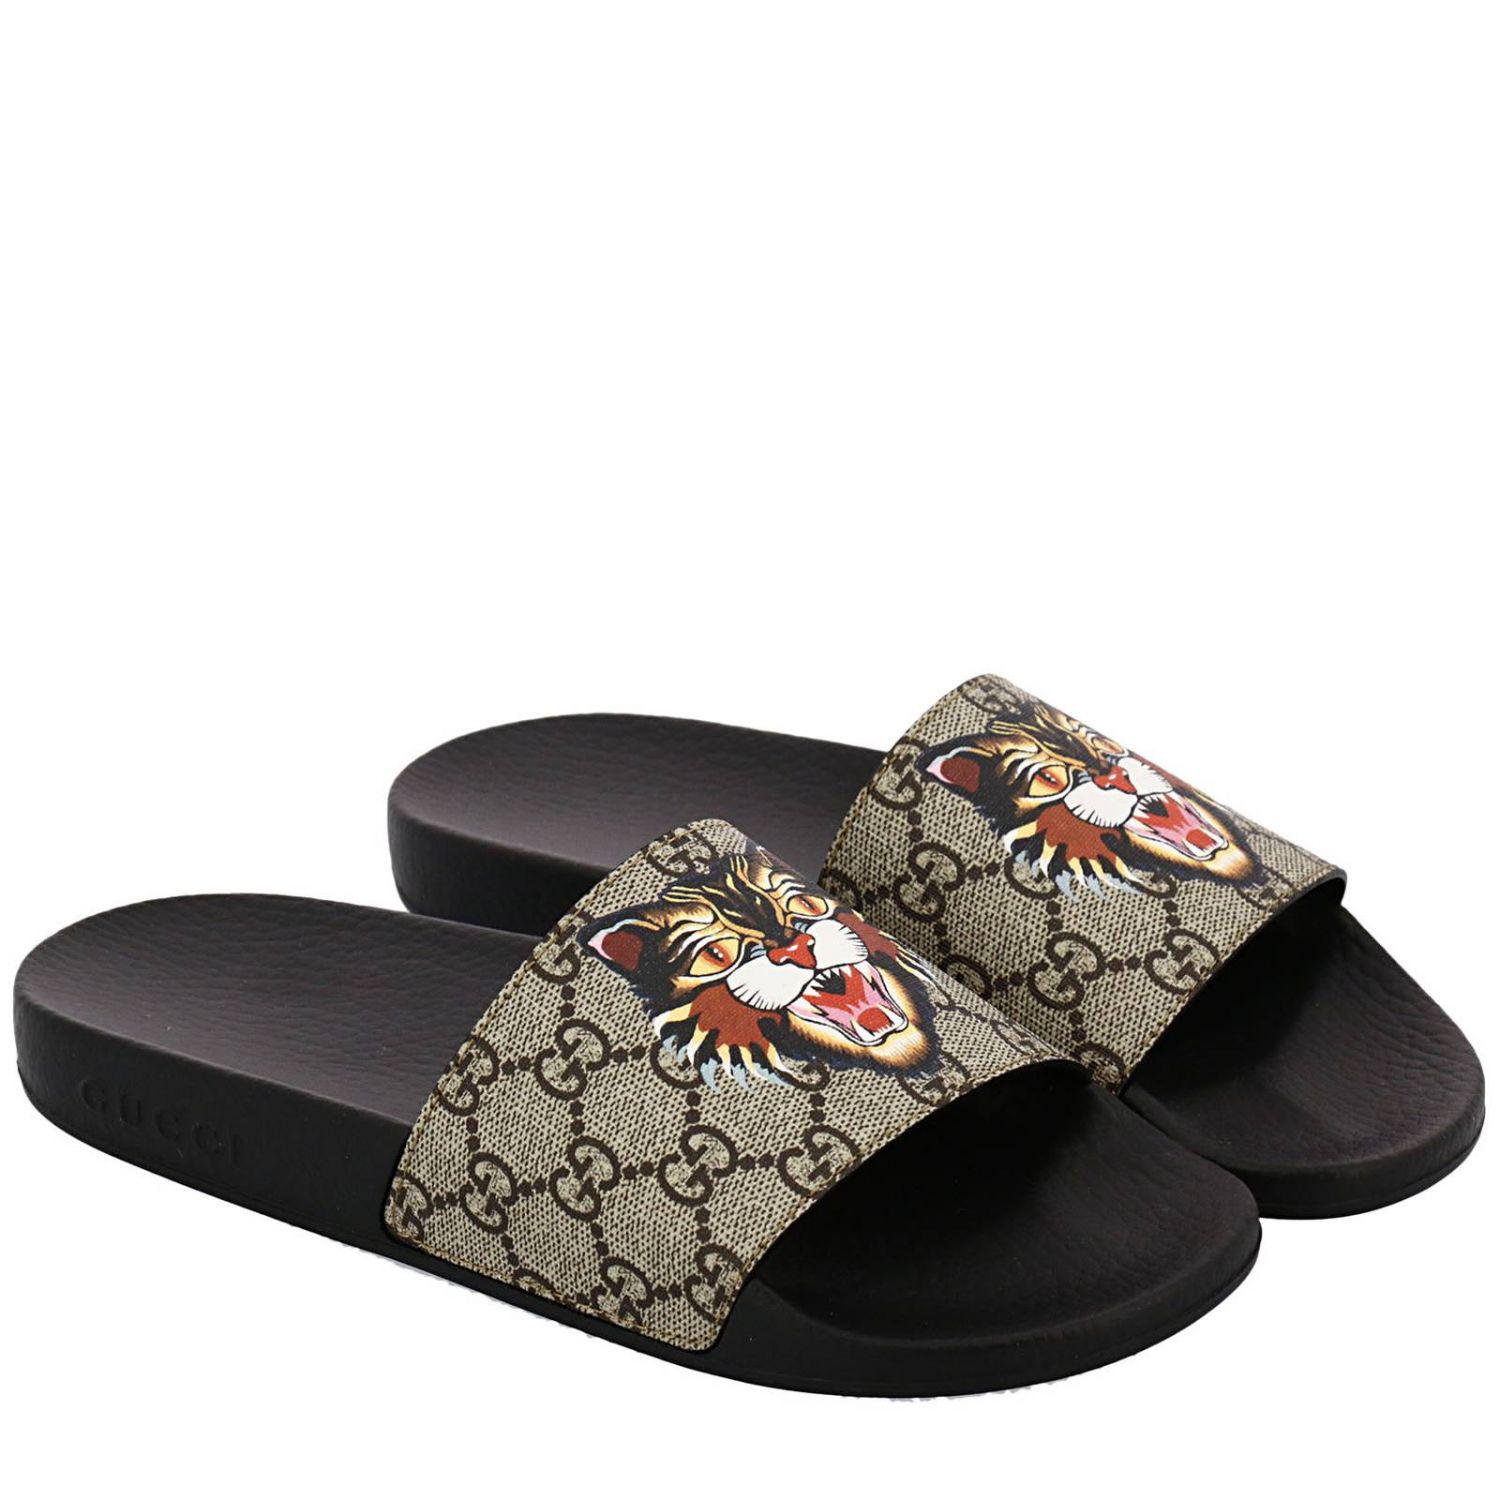 Lyst - Gucci Flat Sandals Shoes Women in Natural